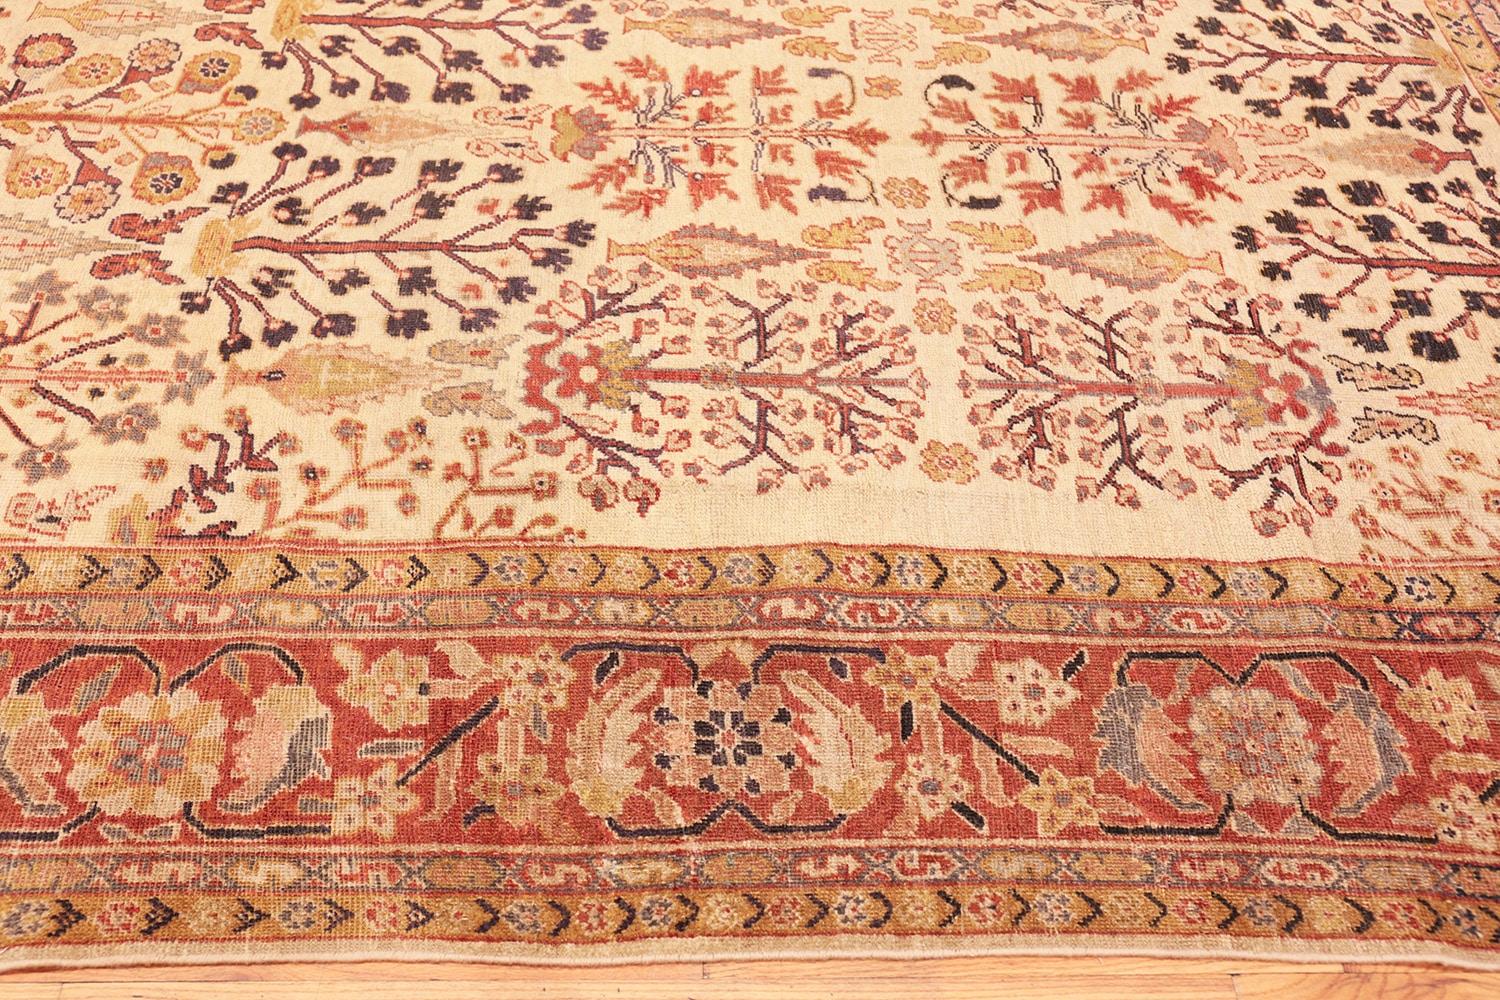 Antique Sultanabad Rug, Country of Origin: Persia, Circa 1900. Size: 7 ft 9 in x 10 ft (2.36 m x 3.05 m)

A vivacious collection of colors springs to life before the viewer of this Sultanabad rug. Bright gold, pearly white and rich red all come